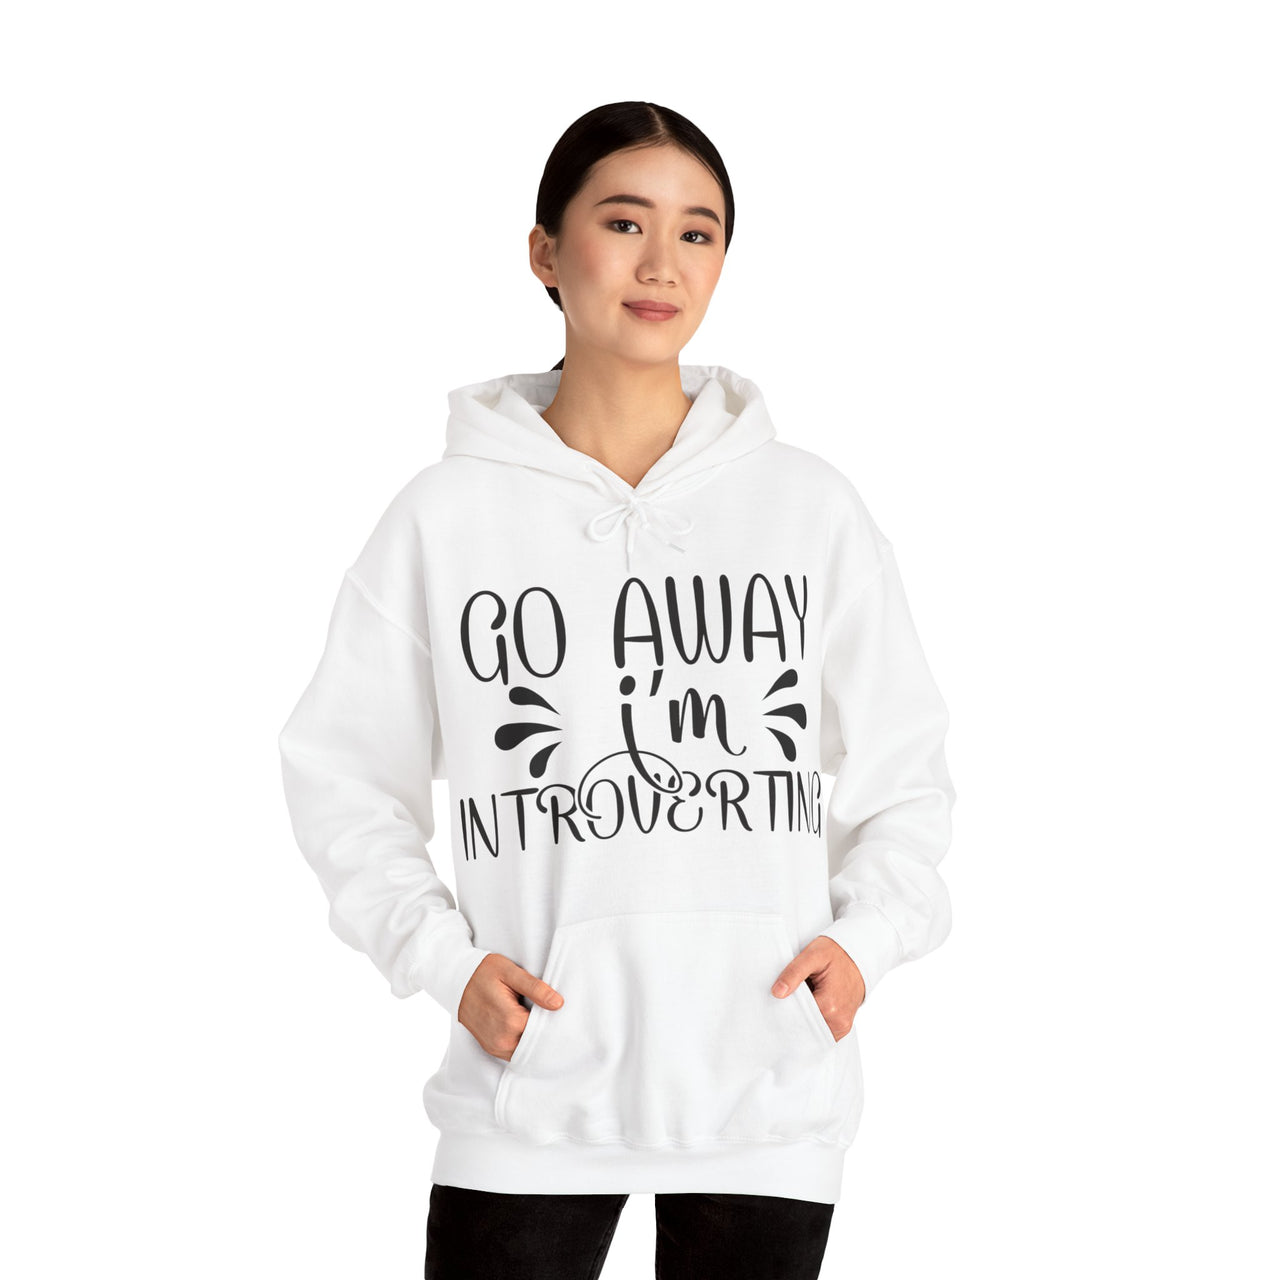 Go away im introverting Cozy Hoodie